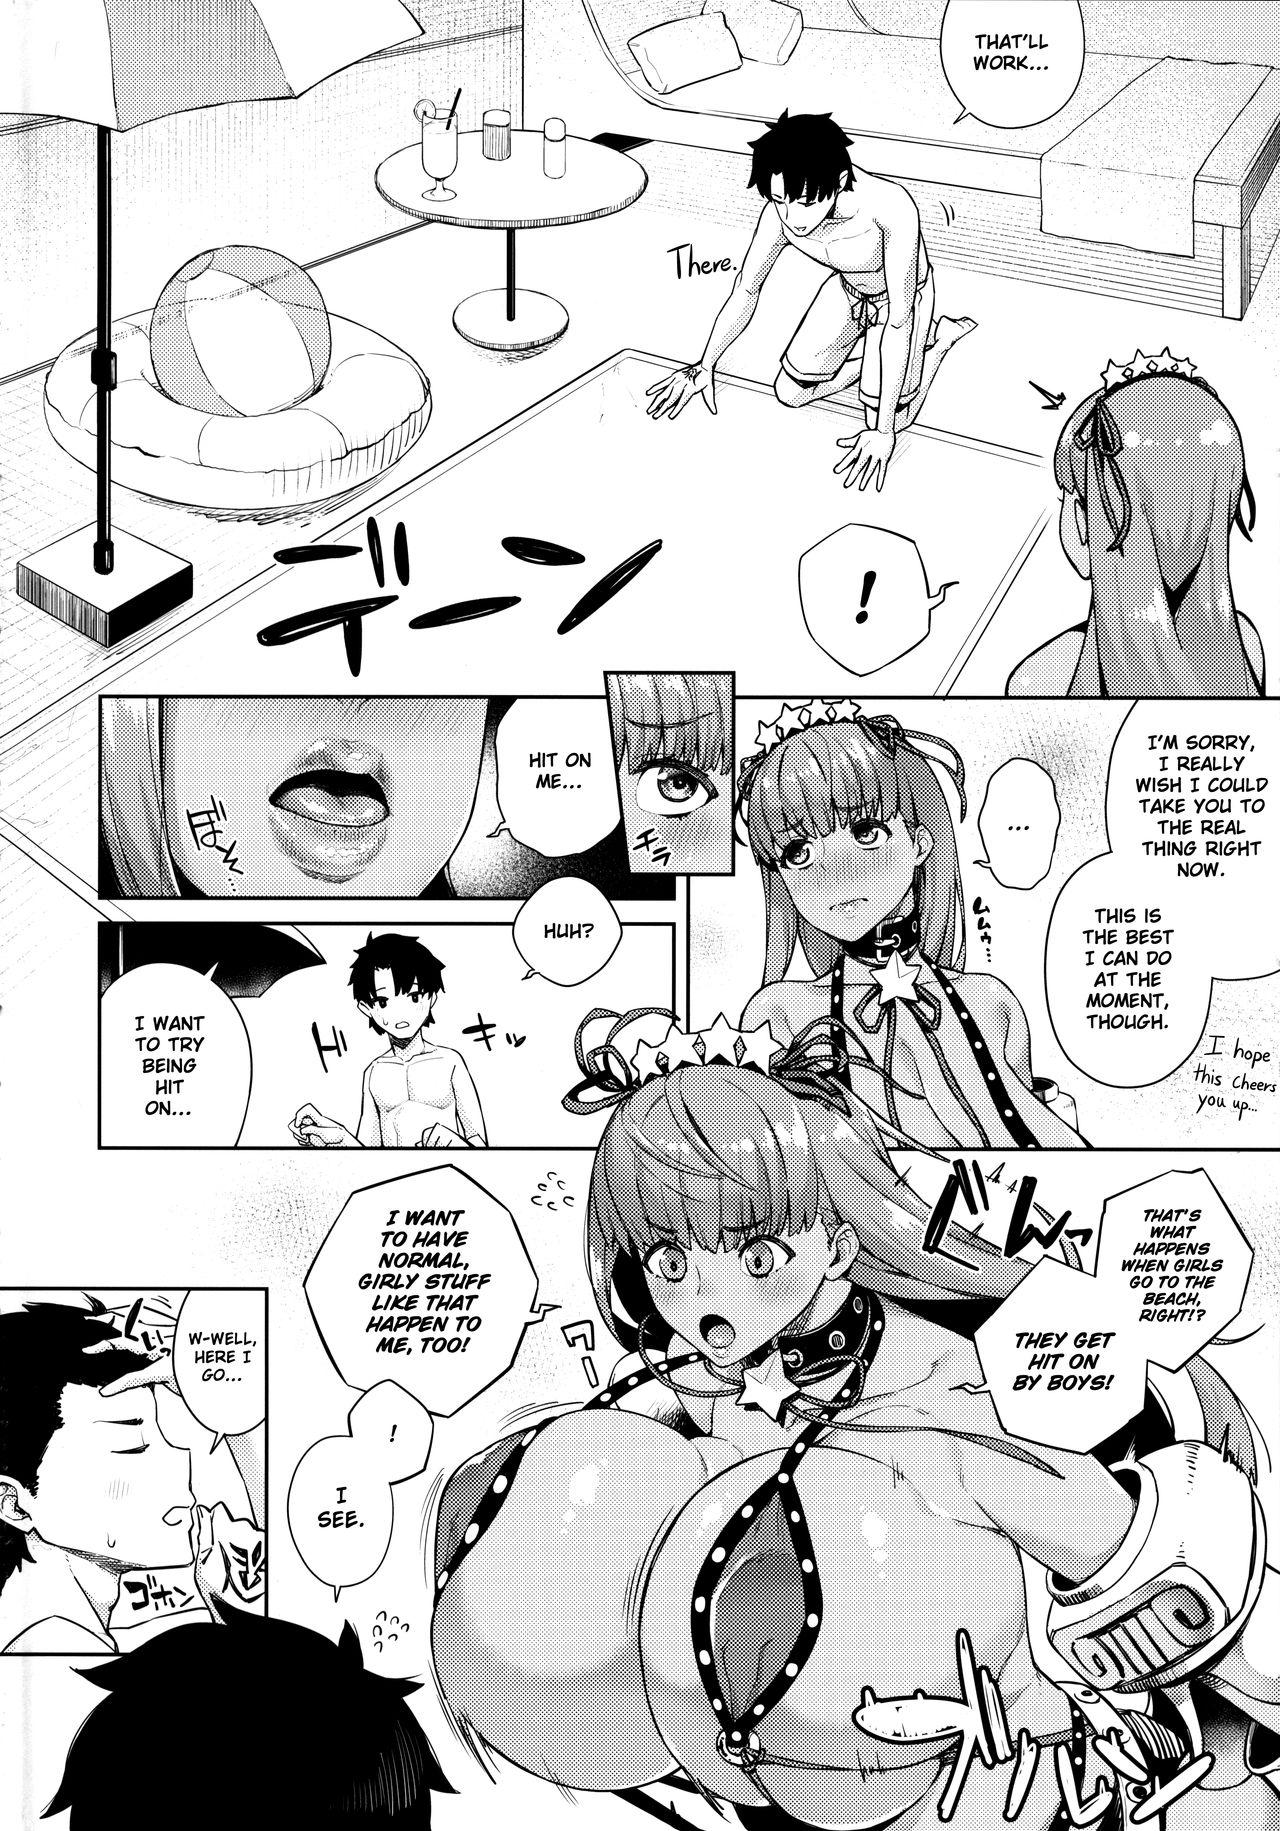 Scene Kyokou no Umibe nite | at the fictional seaside - Fate grand order Hungarian - Page 4